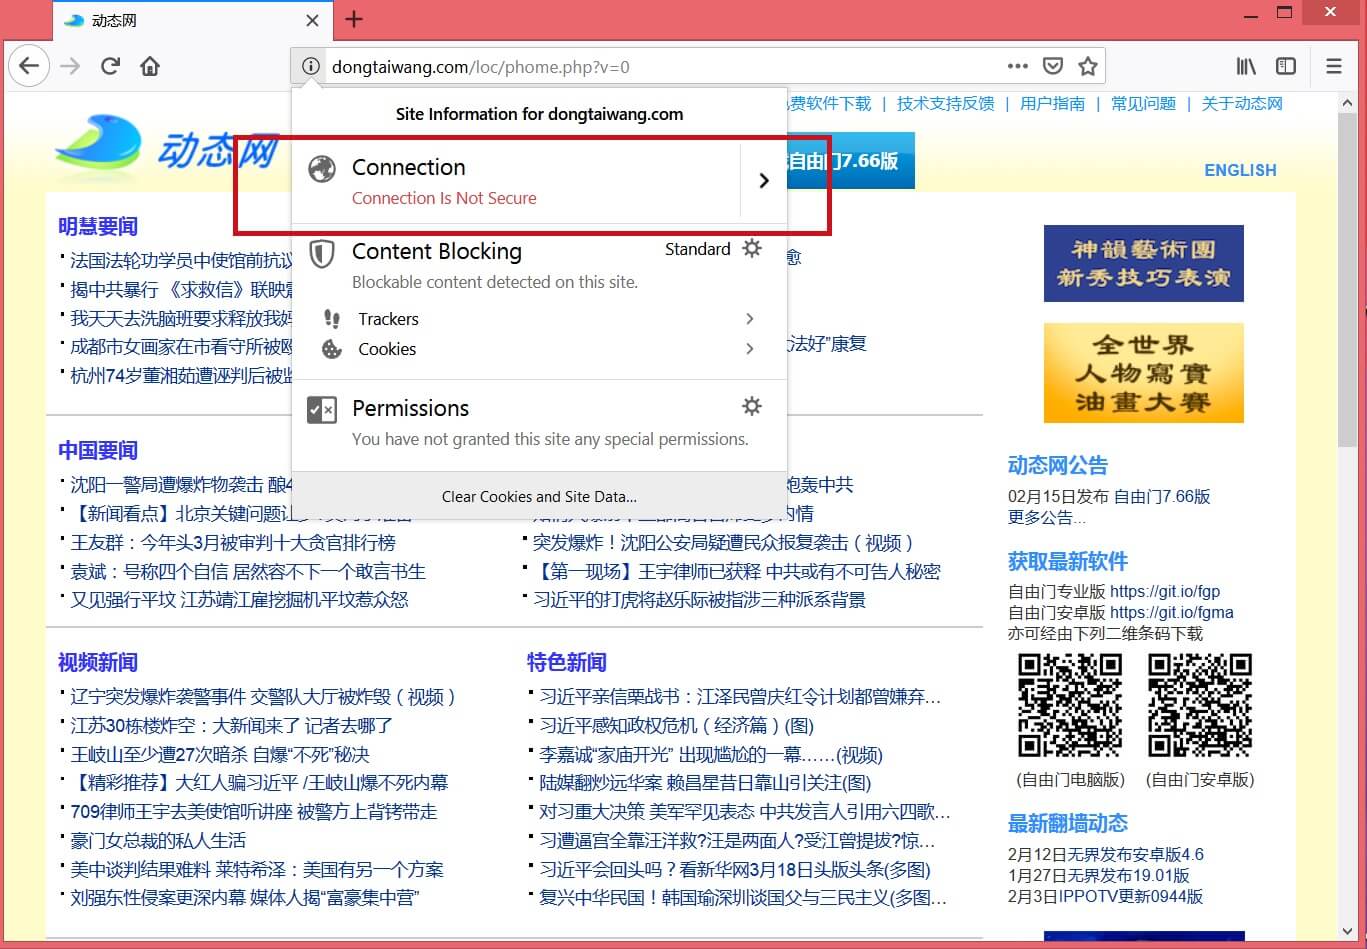 Dongtaiwang.com browser redirect not secure connection sensorstechforum